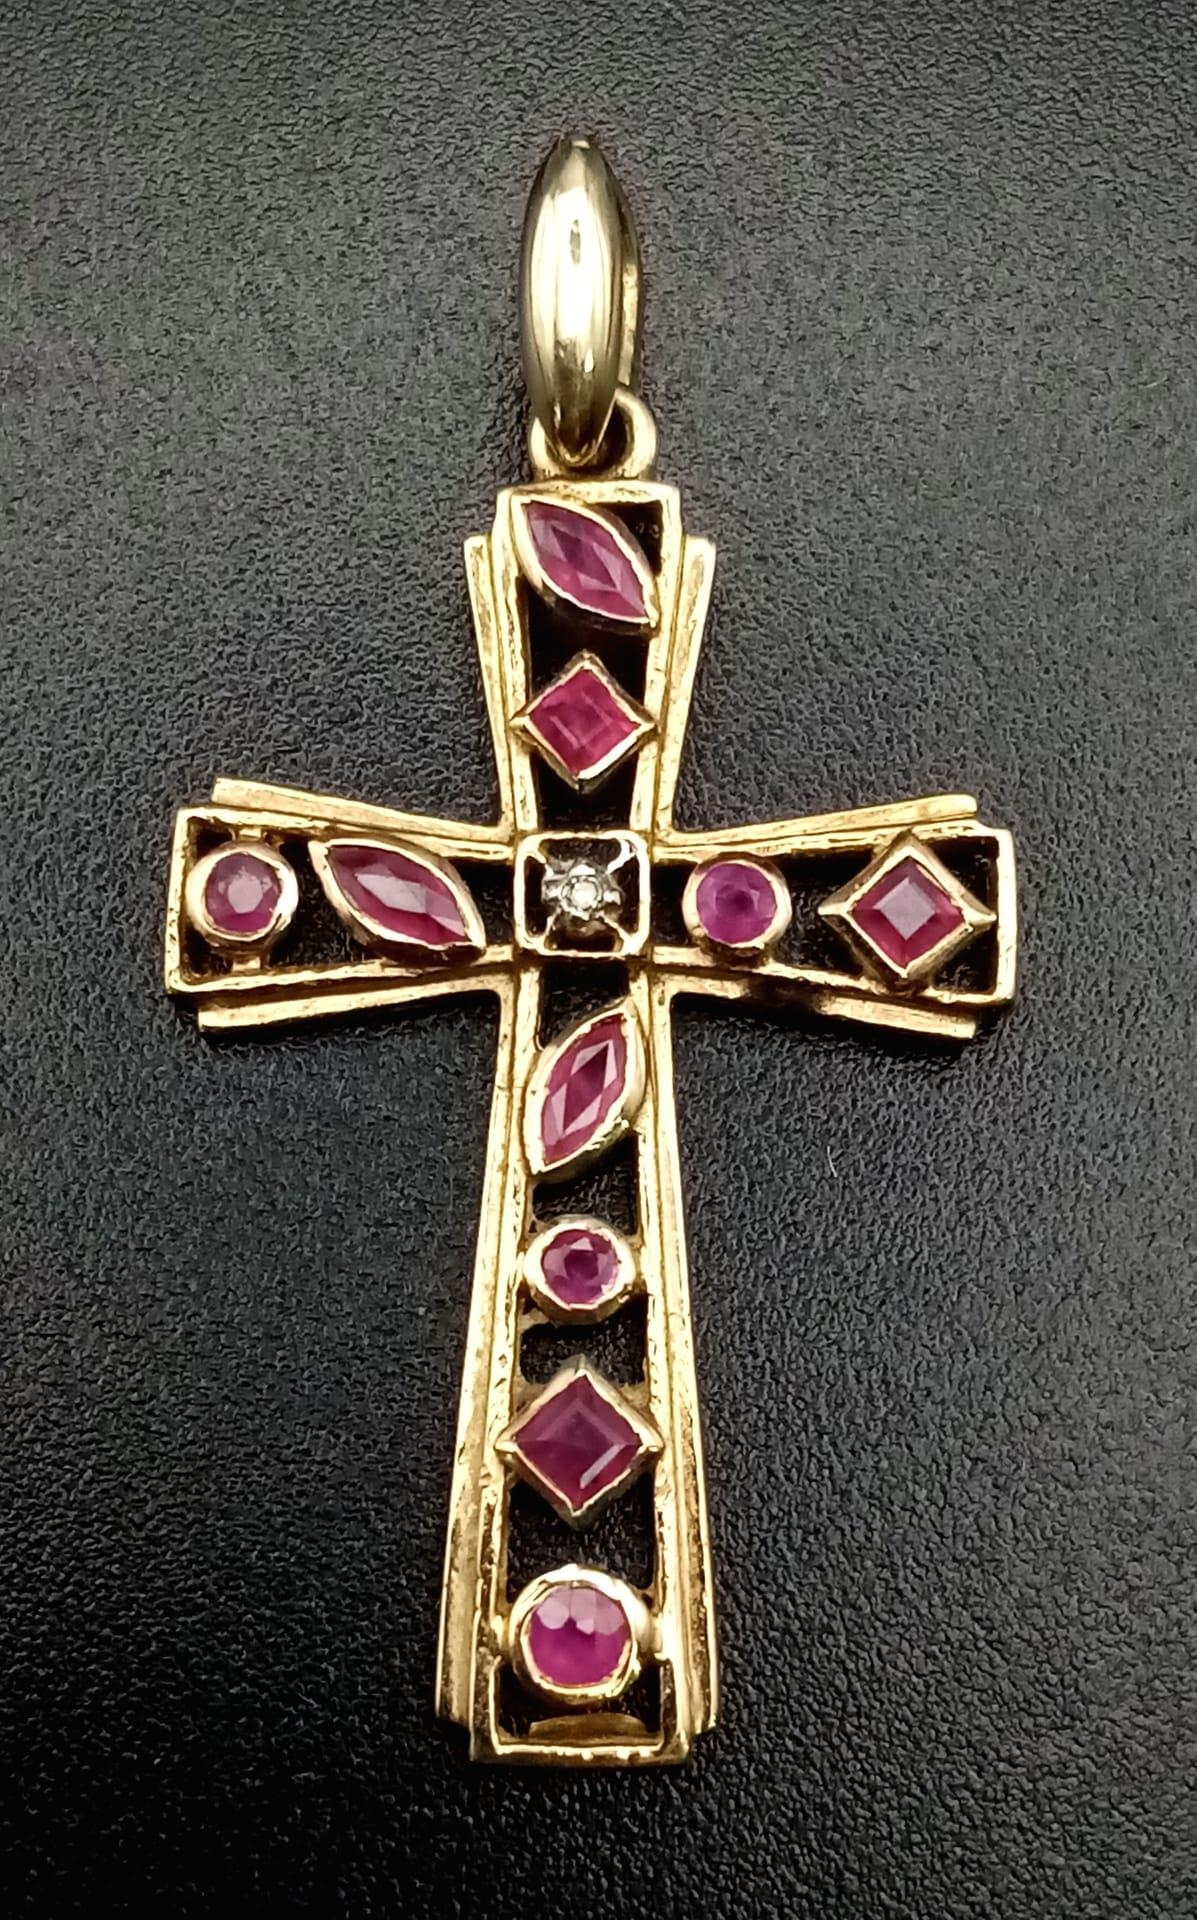 A 9K yellow gold, diamond and ruby set, cross pendant. Length: 29 mm, weight: 1.7 g. - Image 2 of 4